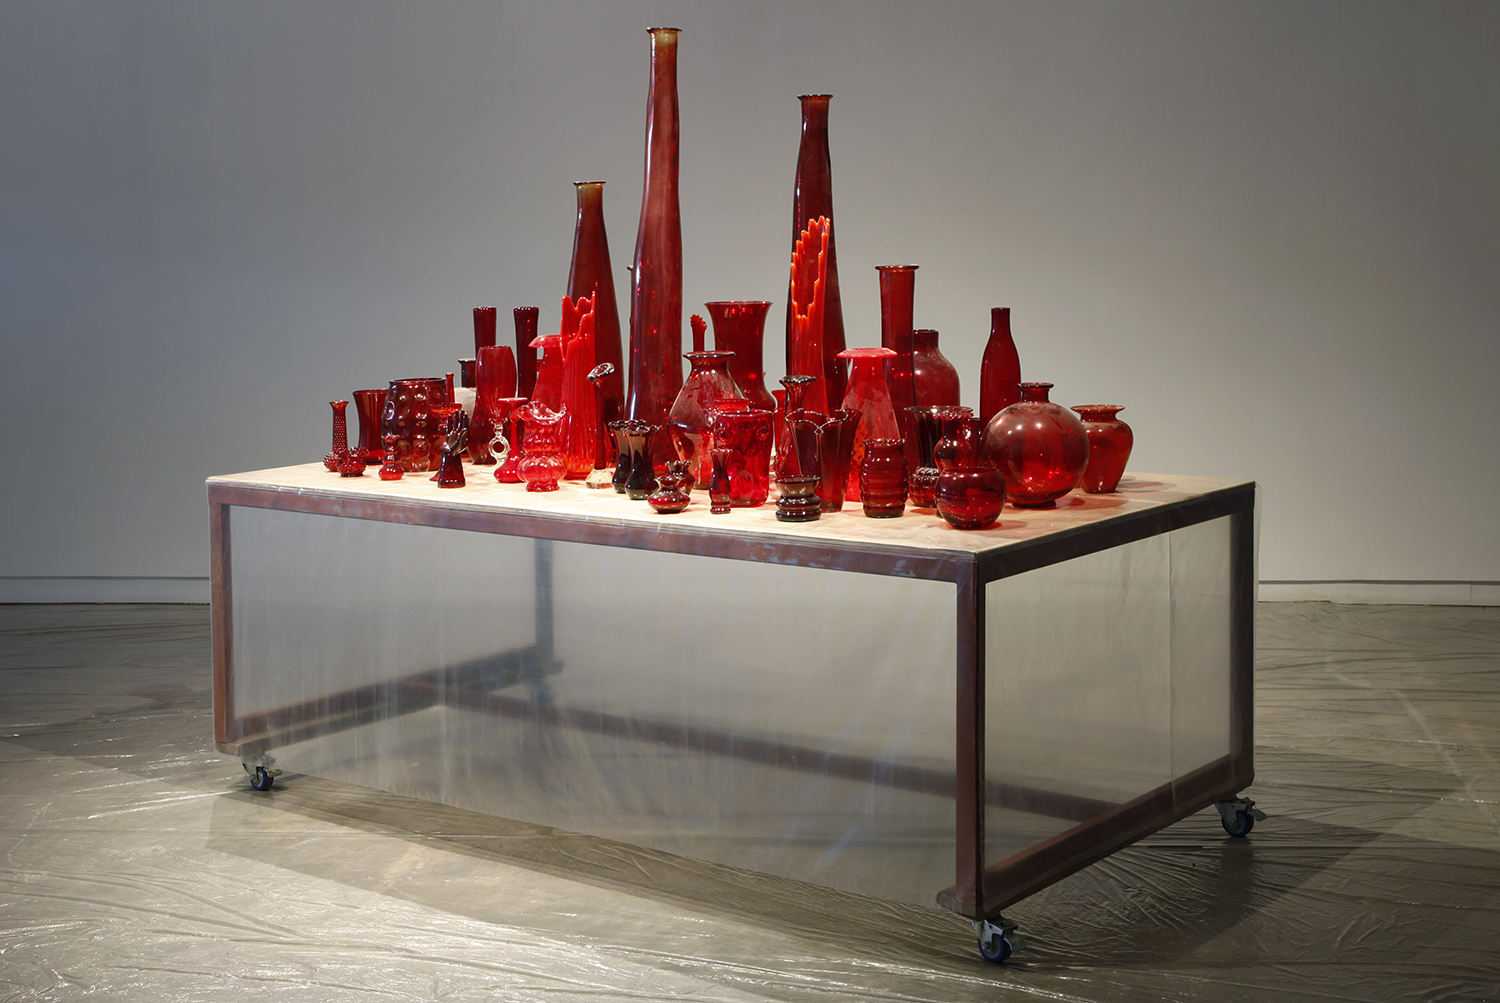   Red Vase Collection &nbsp;(ongoing) glass, dust size variable  Installation view of  Muscled Rose  at Scrap Metal, Toronto, Canada 